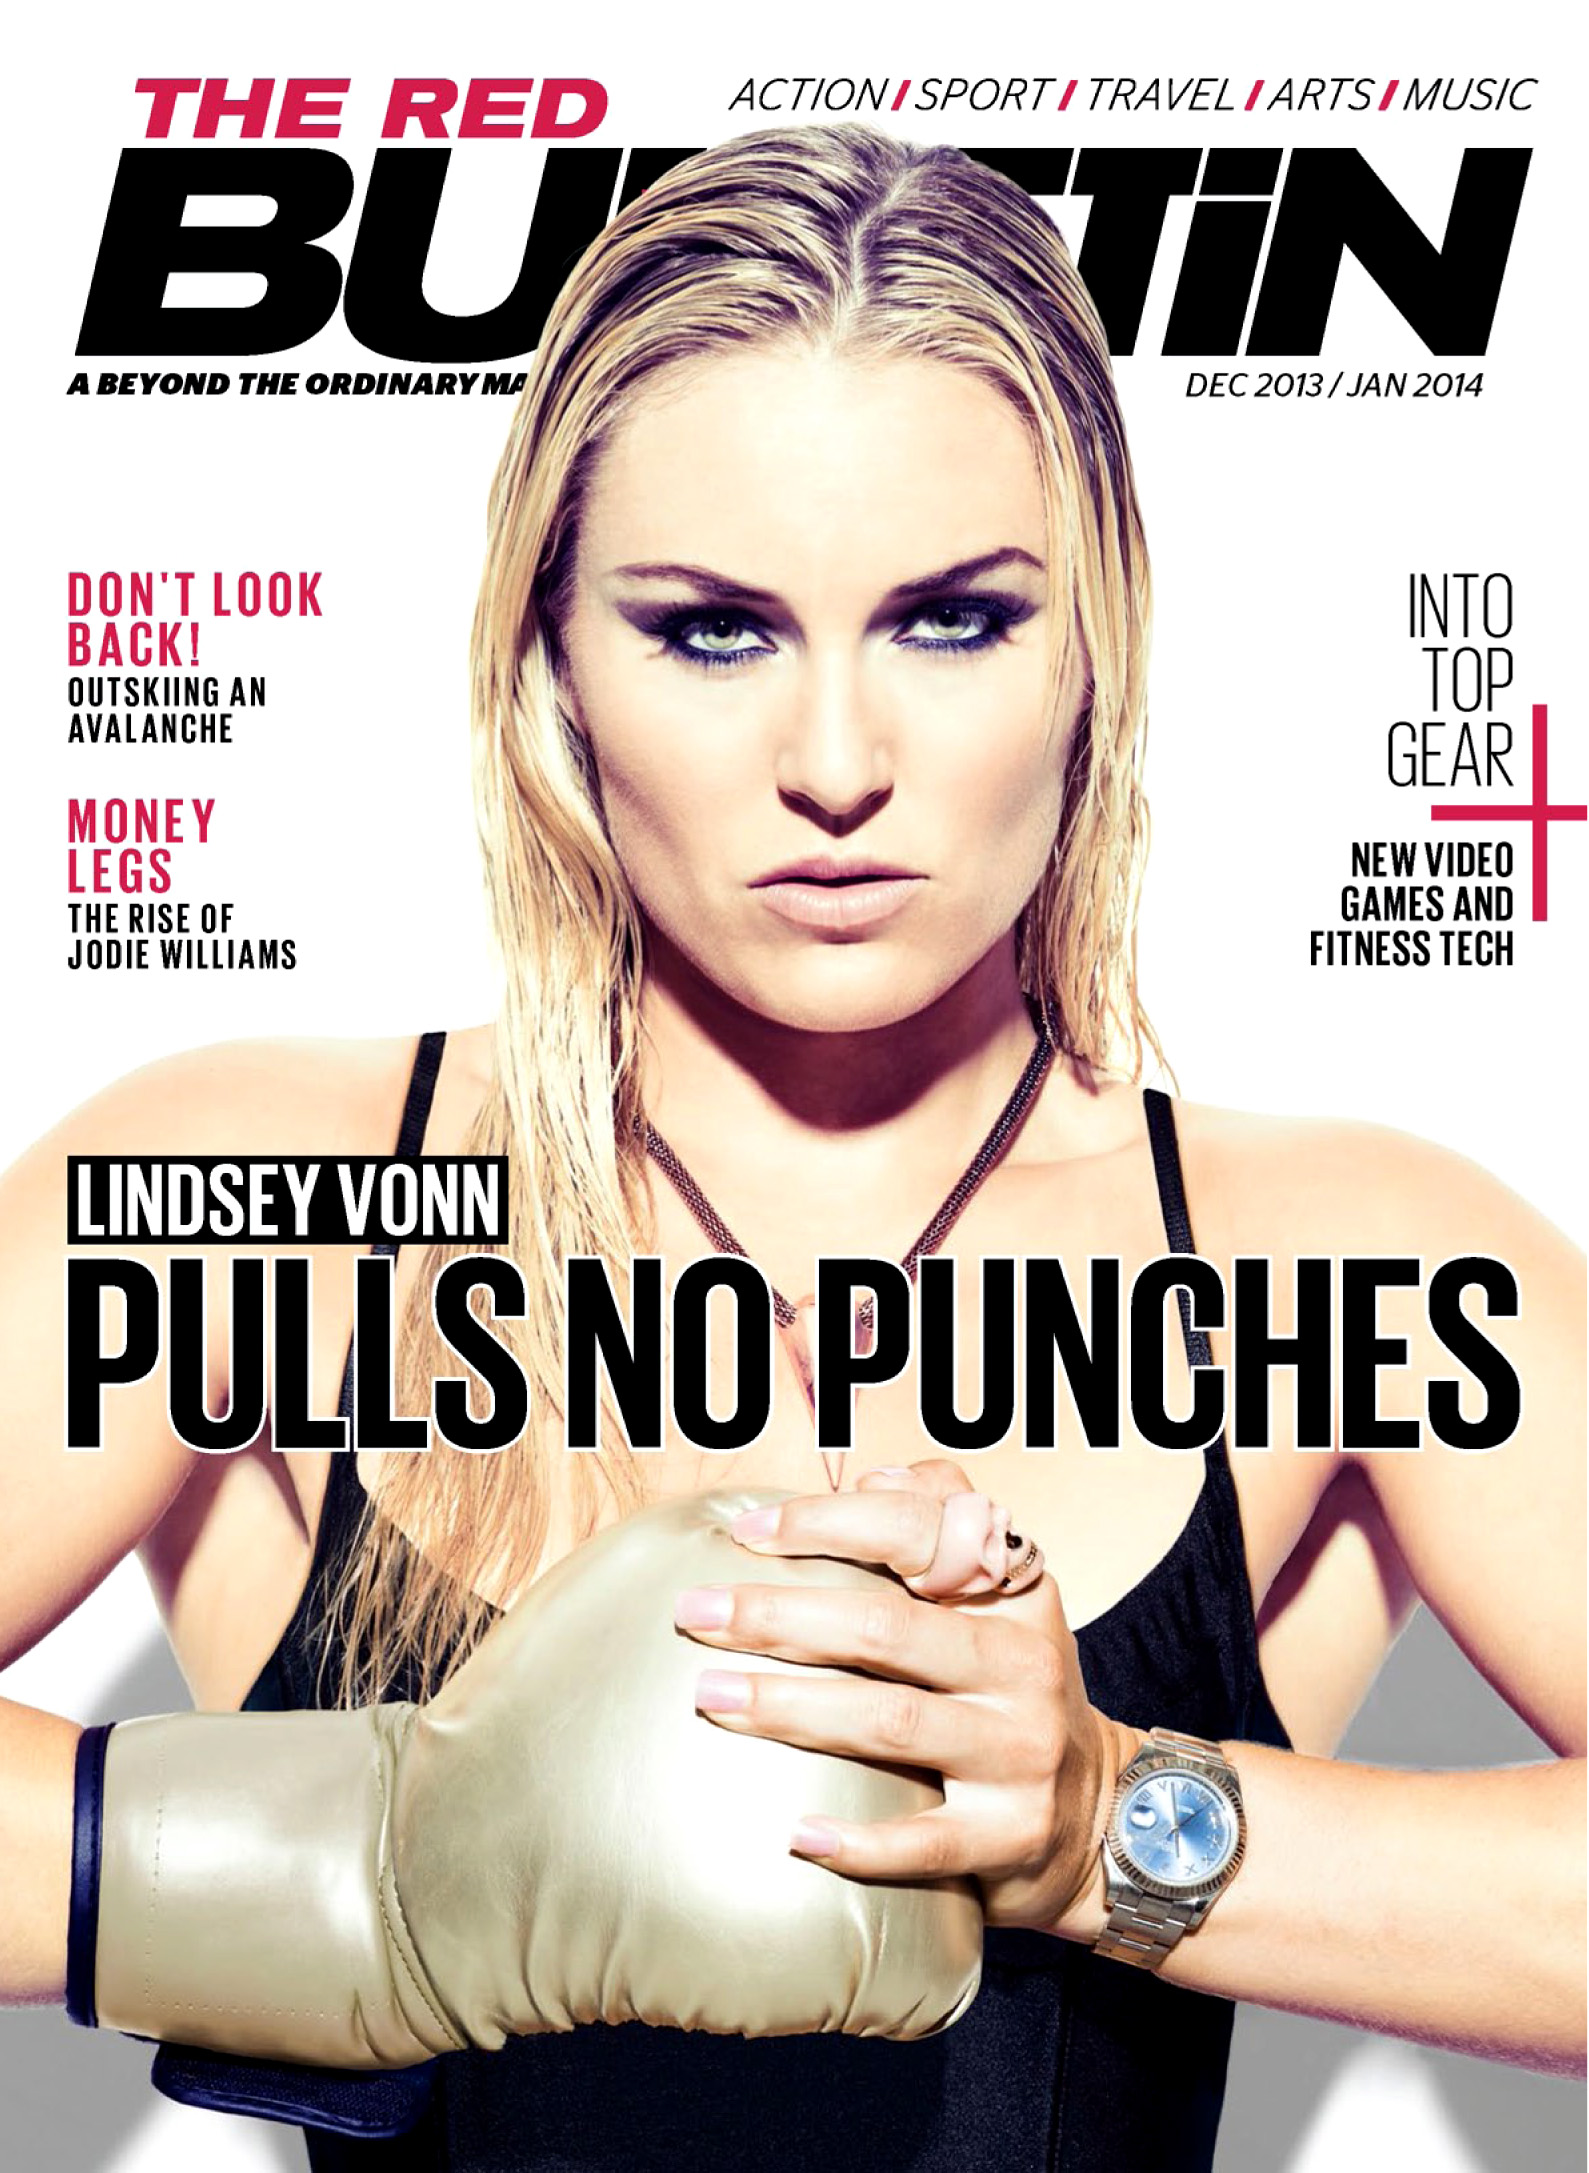 Lindsey Vonn sexy for The Red Bulletin Magazine